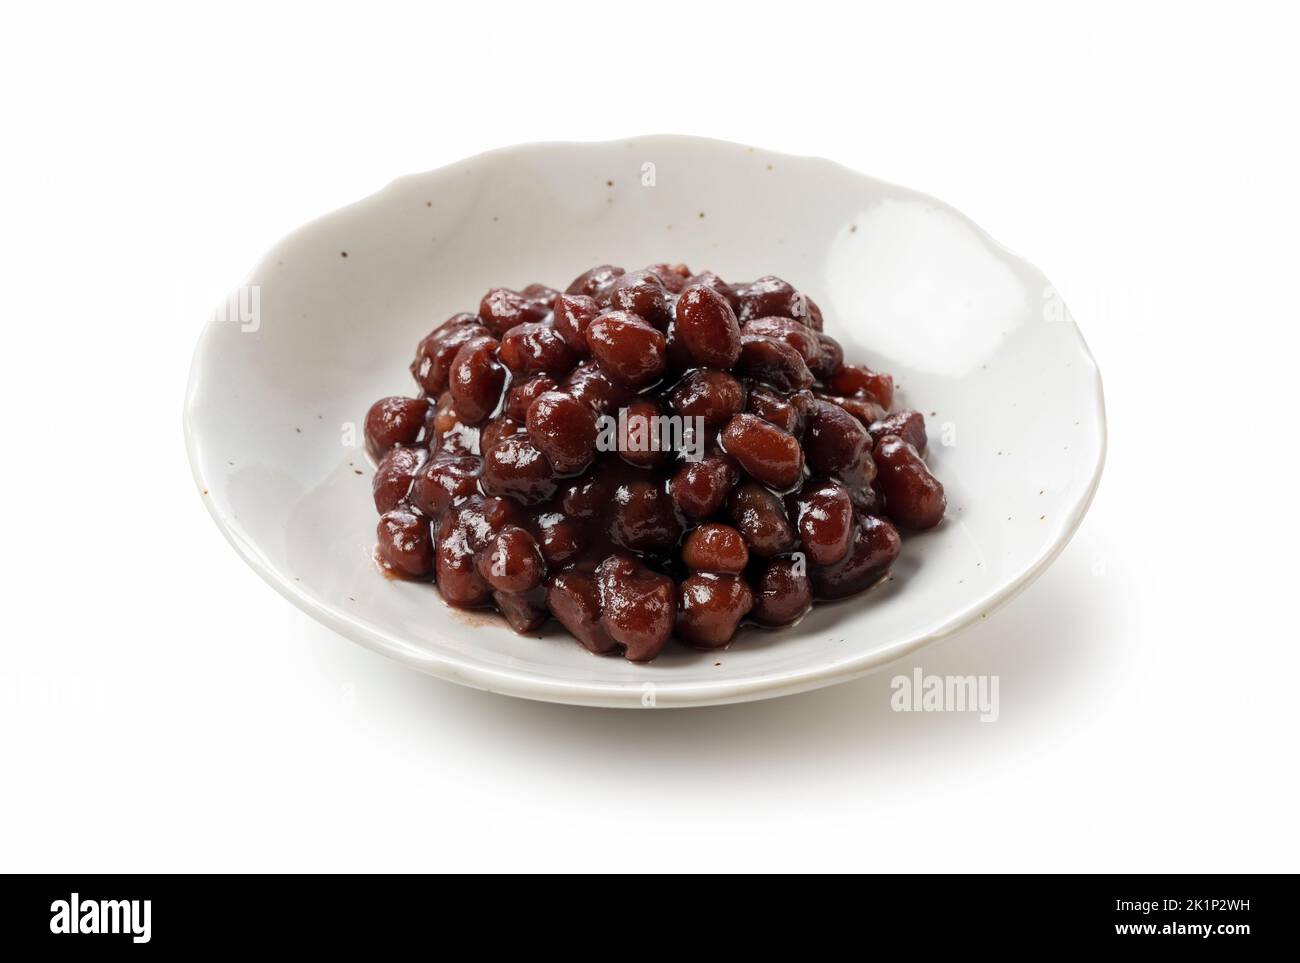 Boiled azuki beans in a dish placed on a white background. Stock Photo